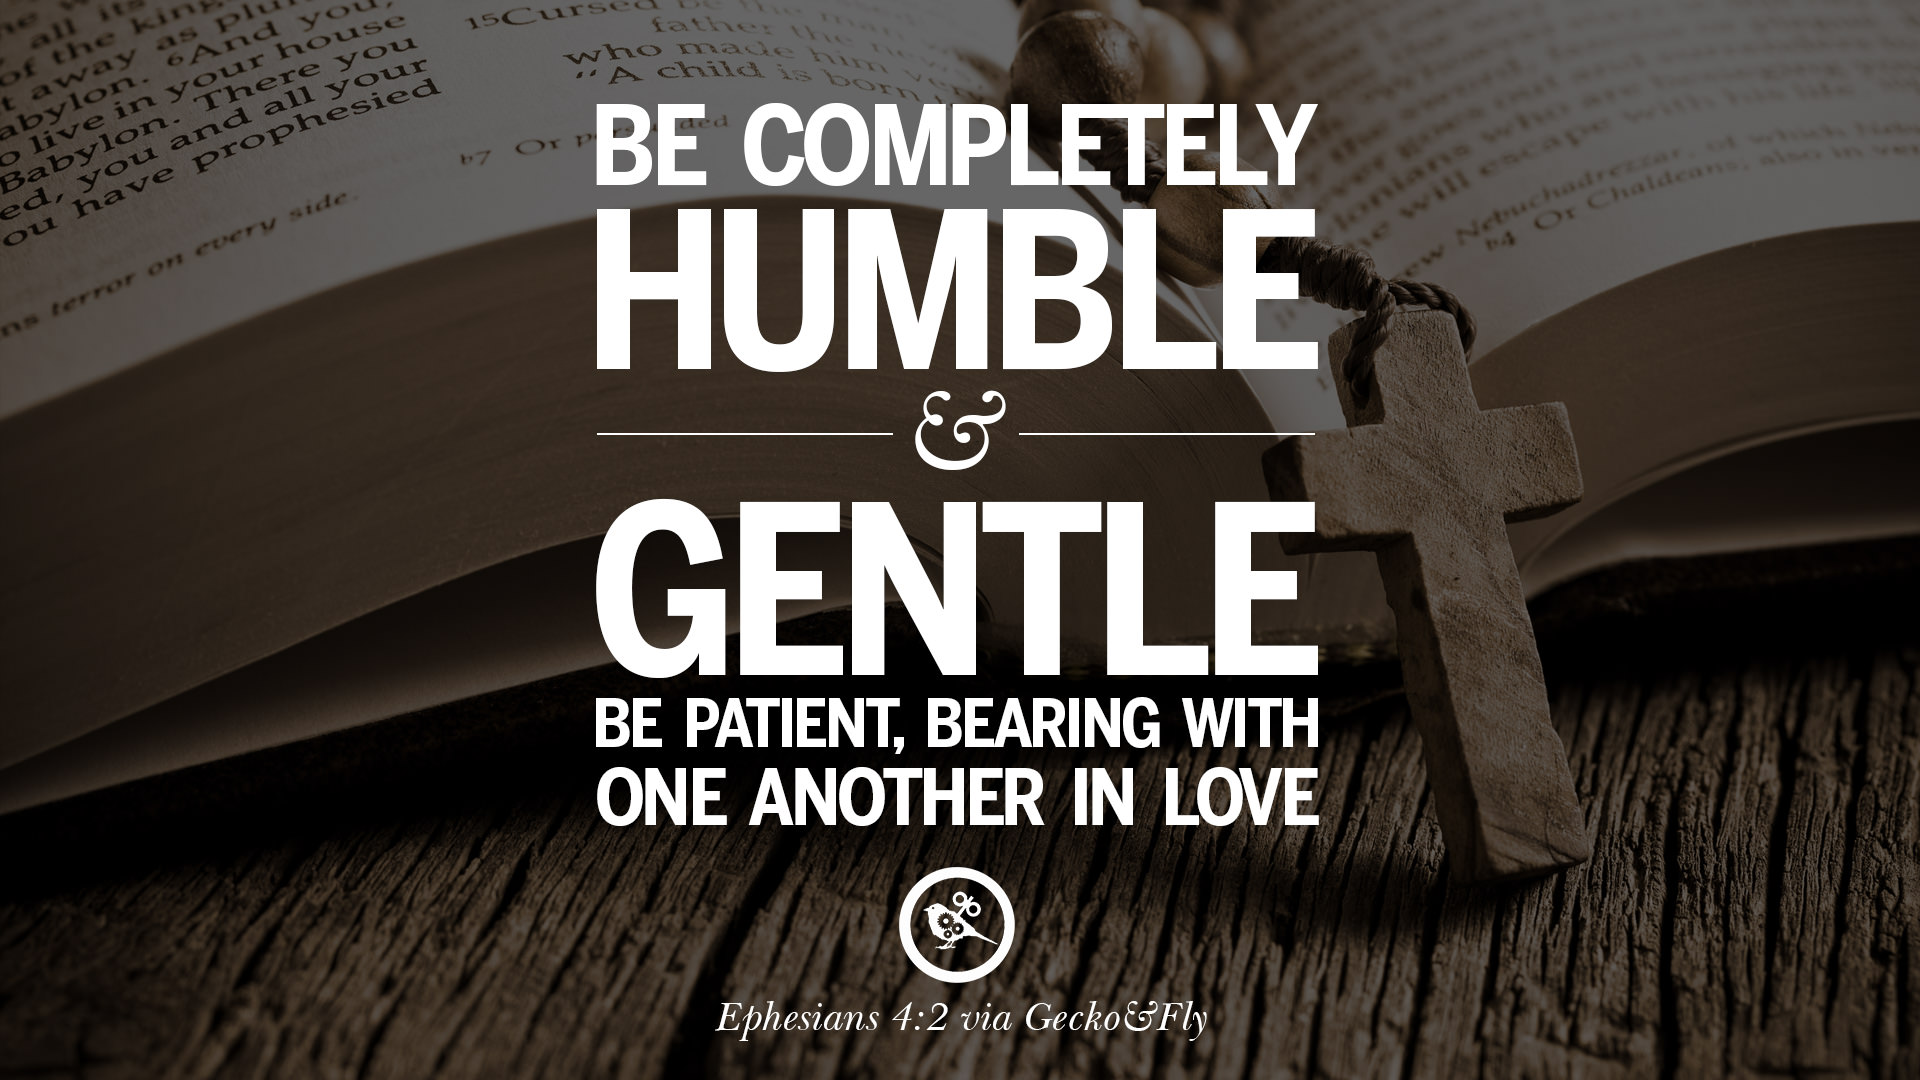 Be pletely humble and gentle be patient bearing with one another in love – Ephesians 4 2